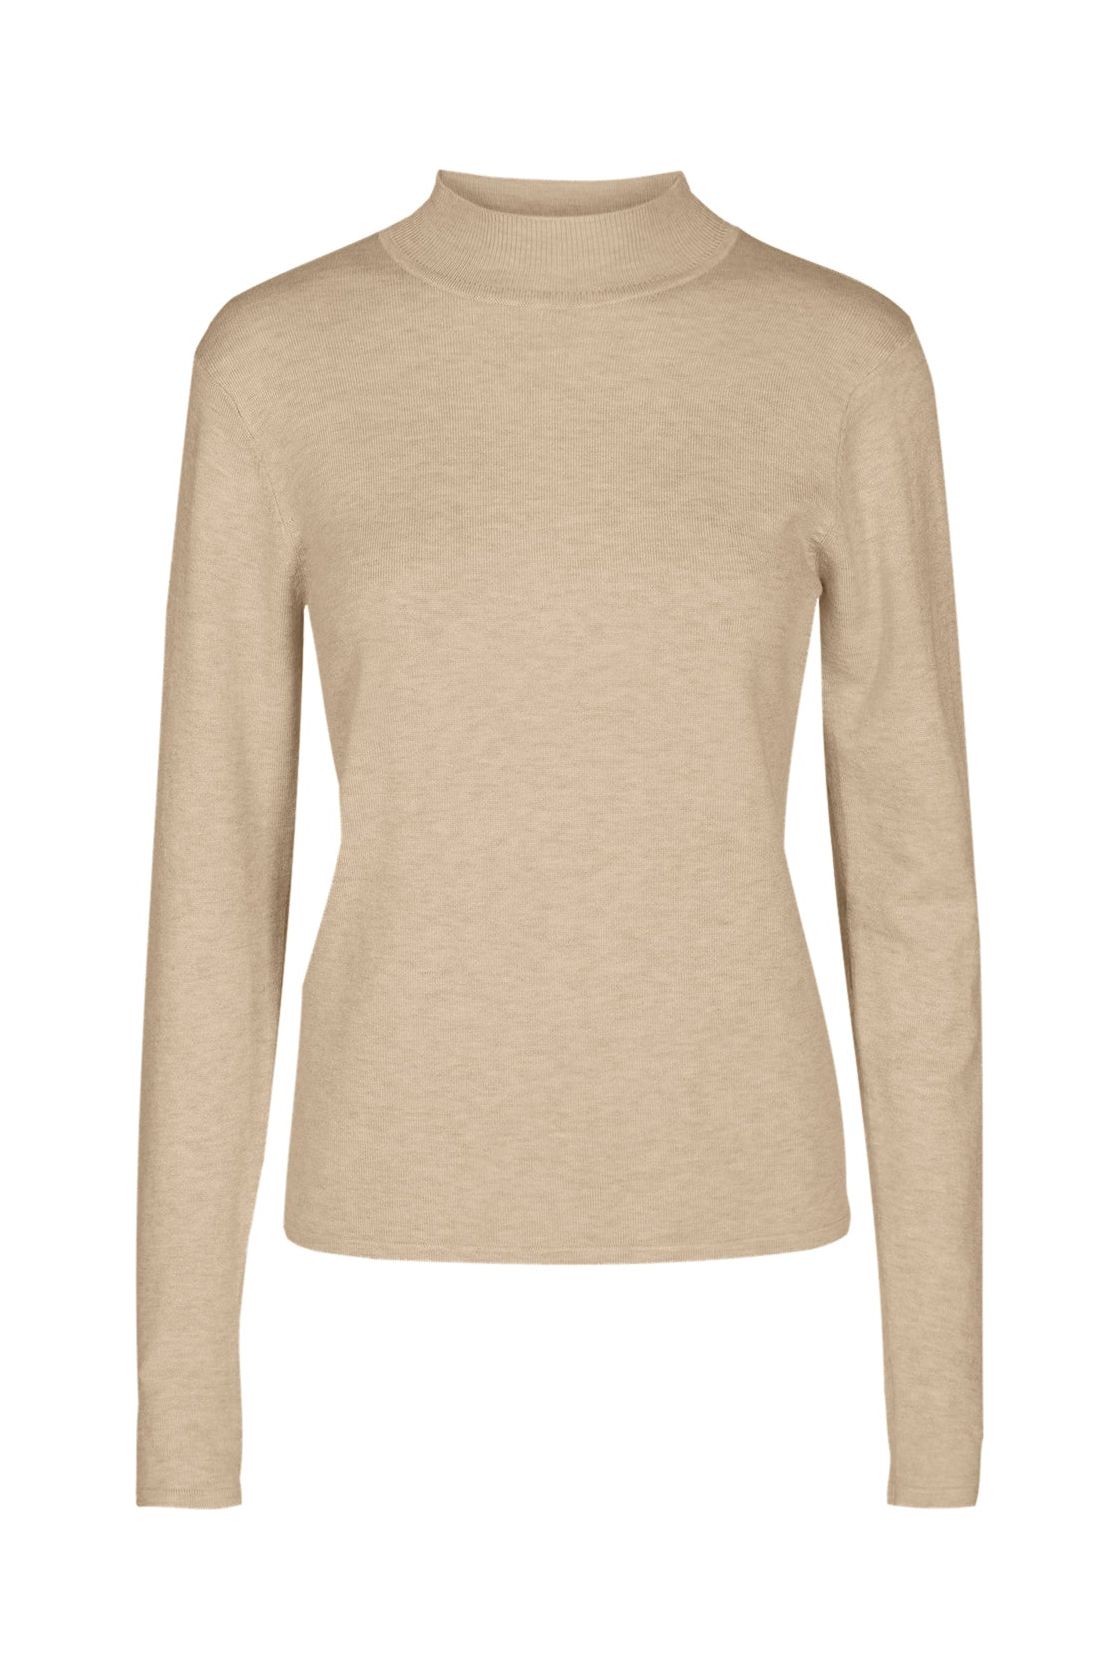 SoyaConcept - Dollie 245 - Classic Pullover Knit Lightweight Sweater - Sand - 32993 -